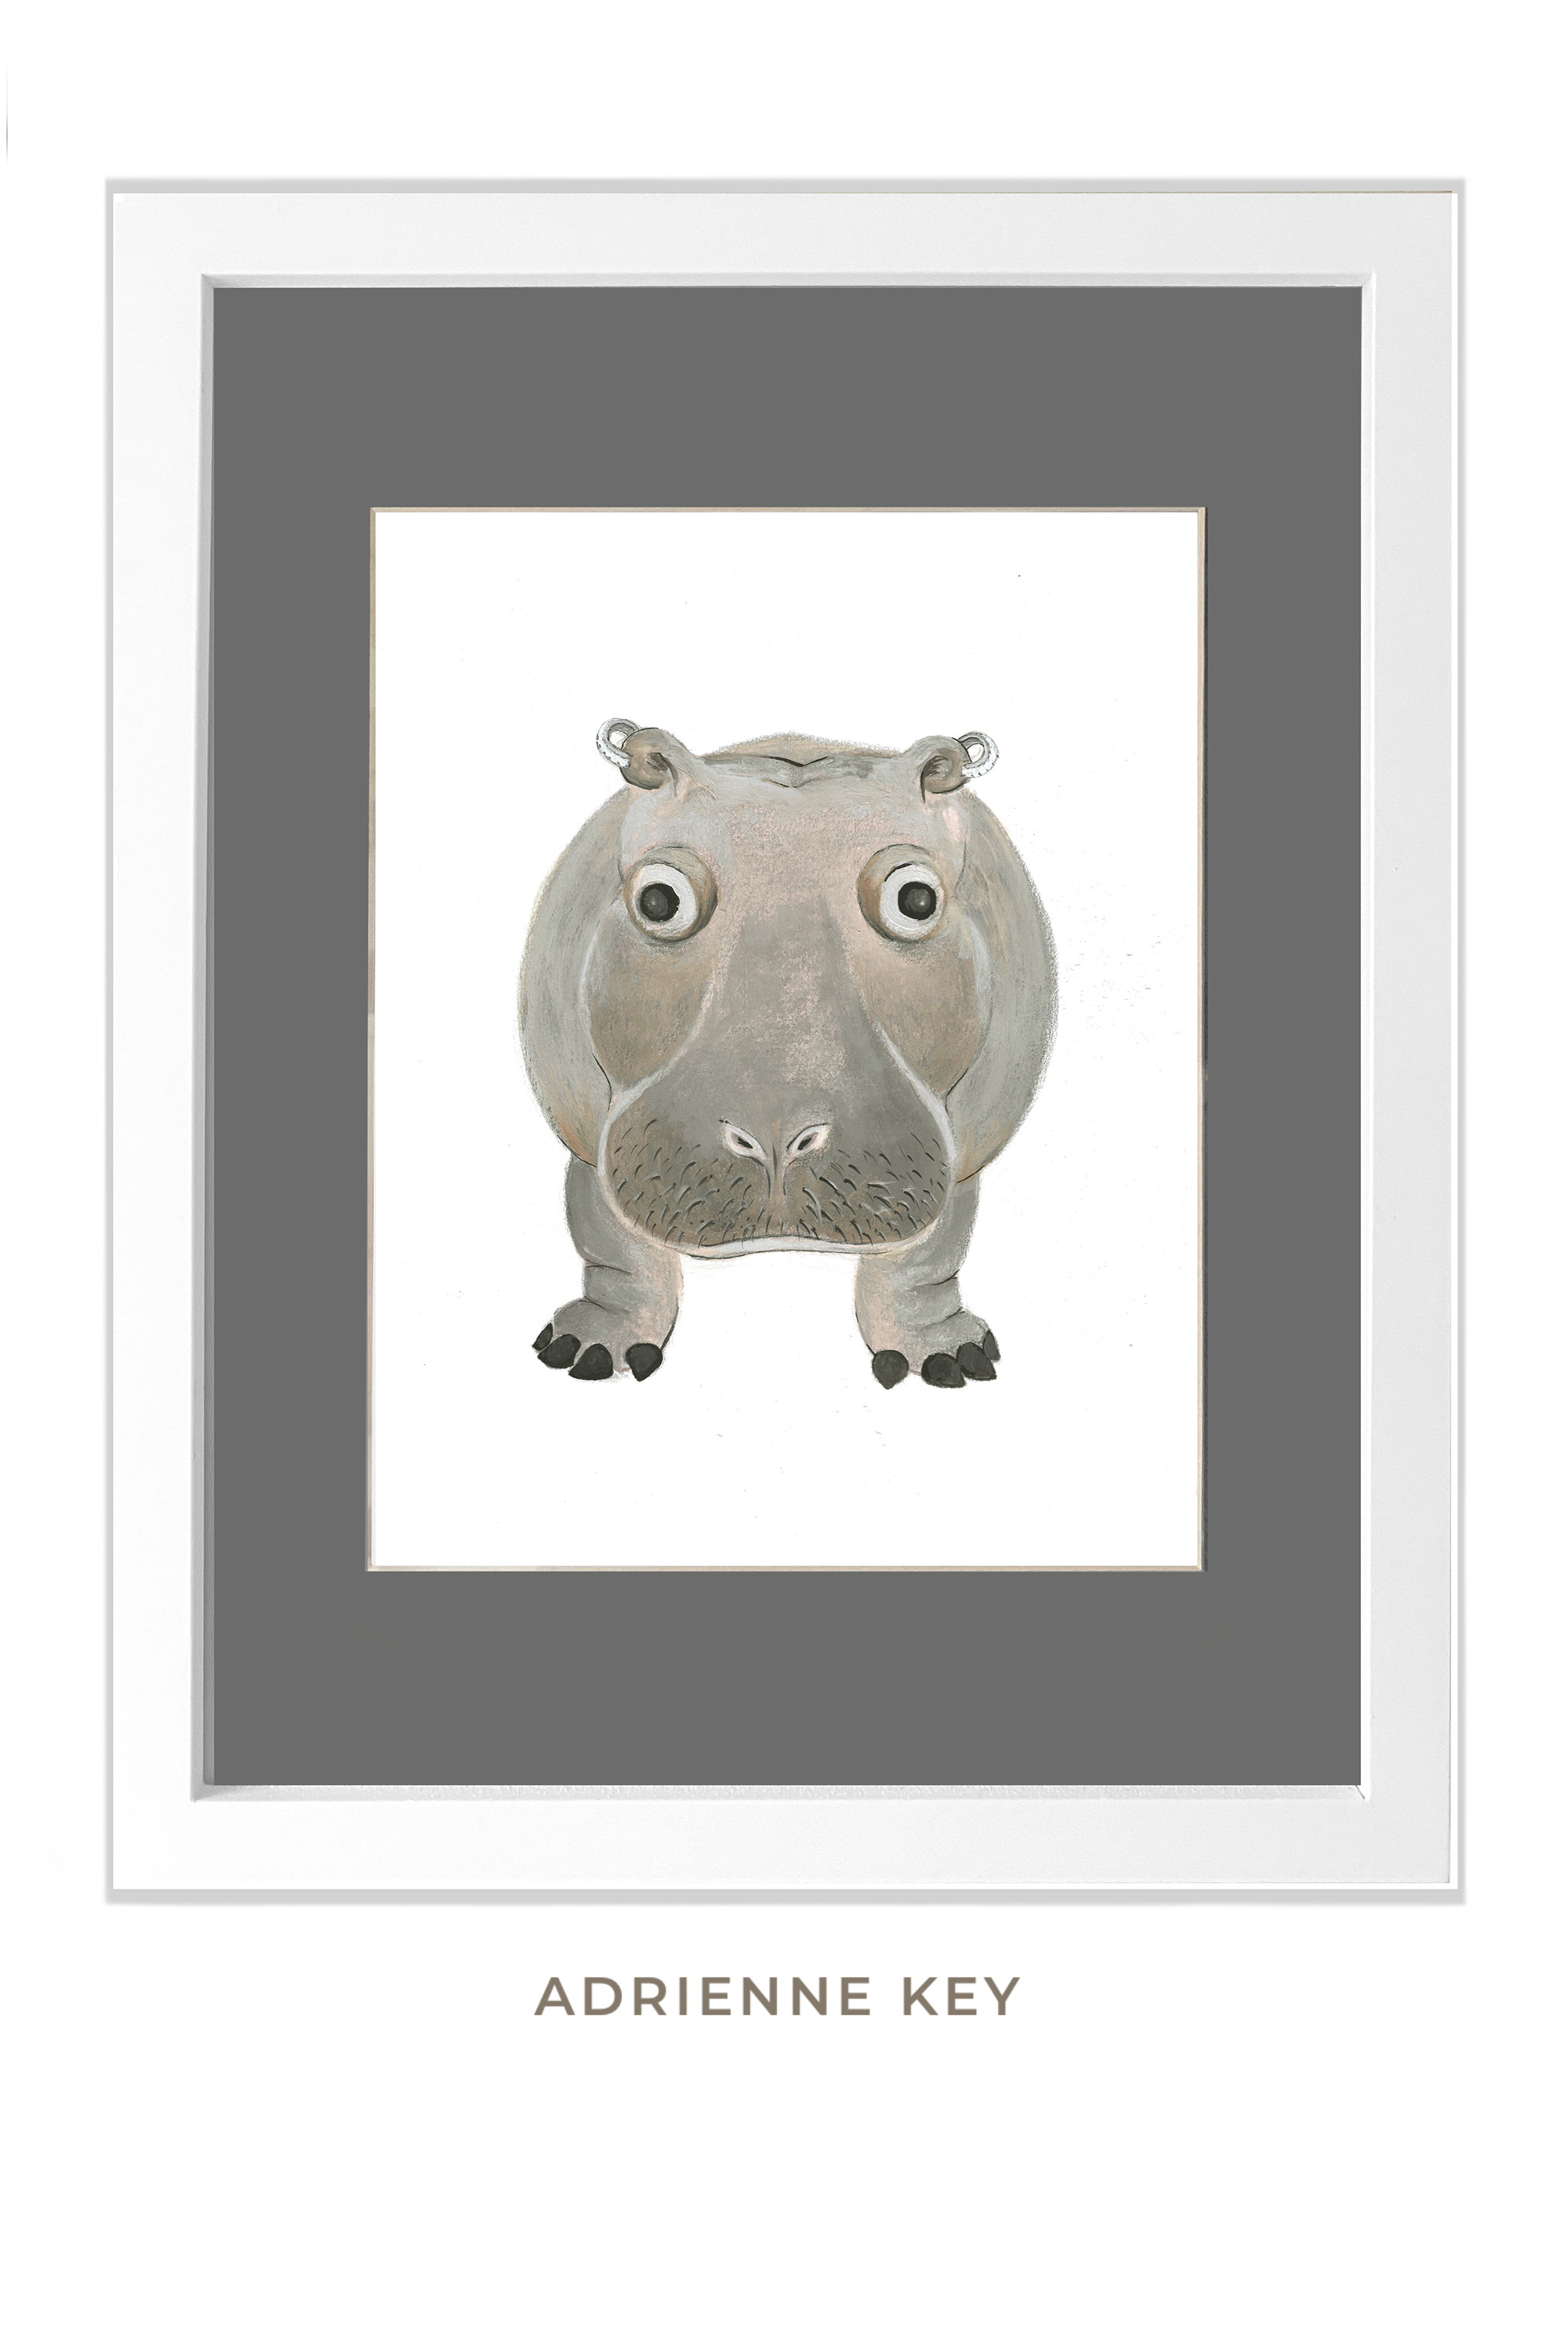 Original framed art in ink, watercolor, and color pencil of a hippo facing forward with diamond earrings